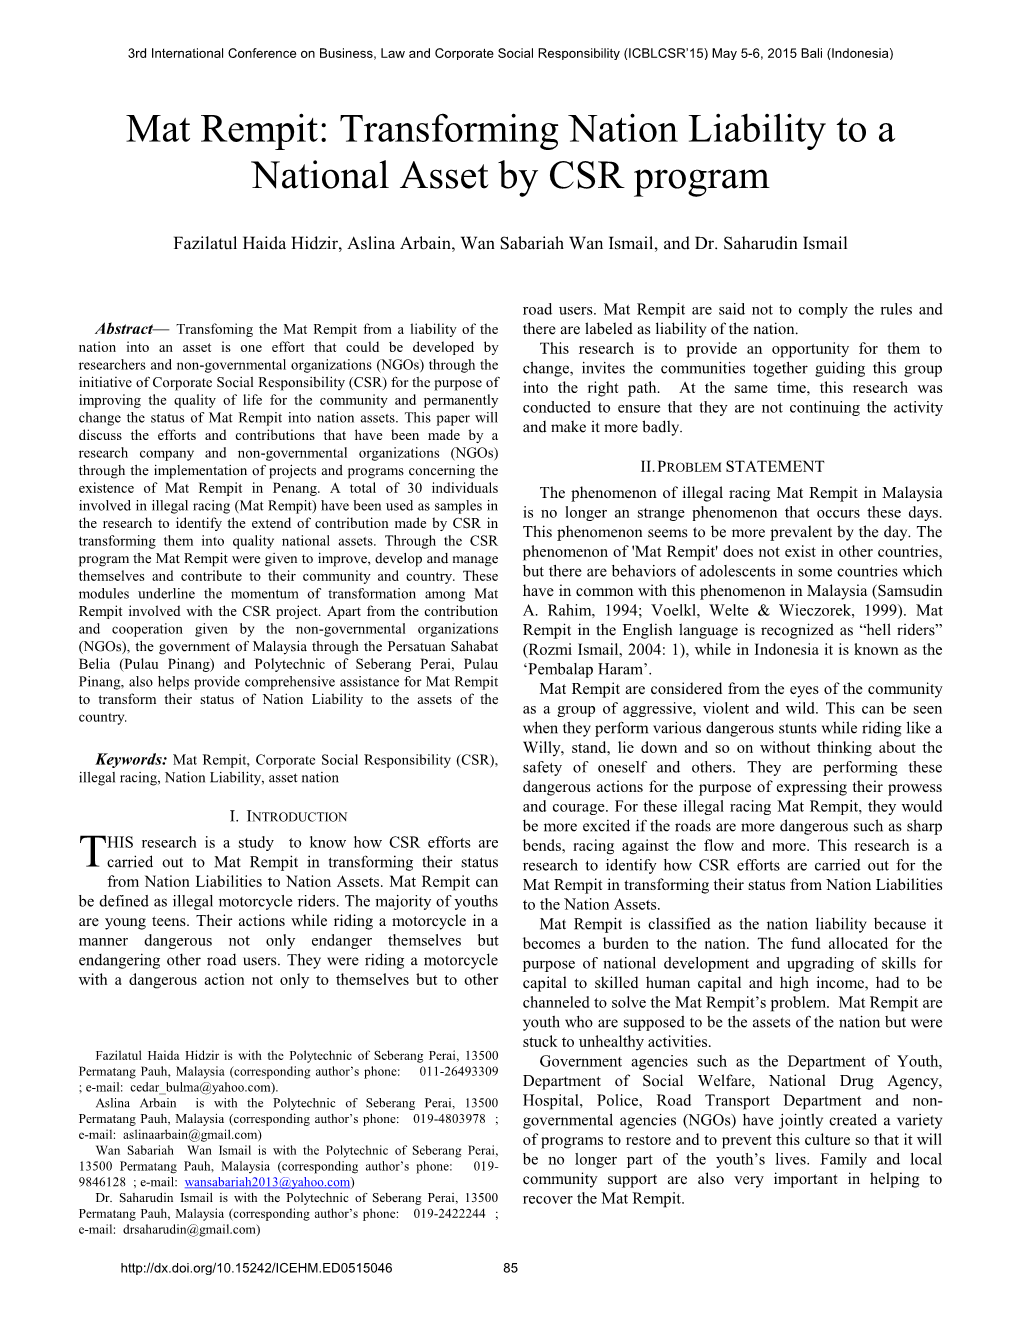 Mat Rempit: Transforming Nation Liability to a National Asset by CSR Program